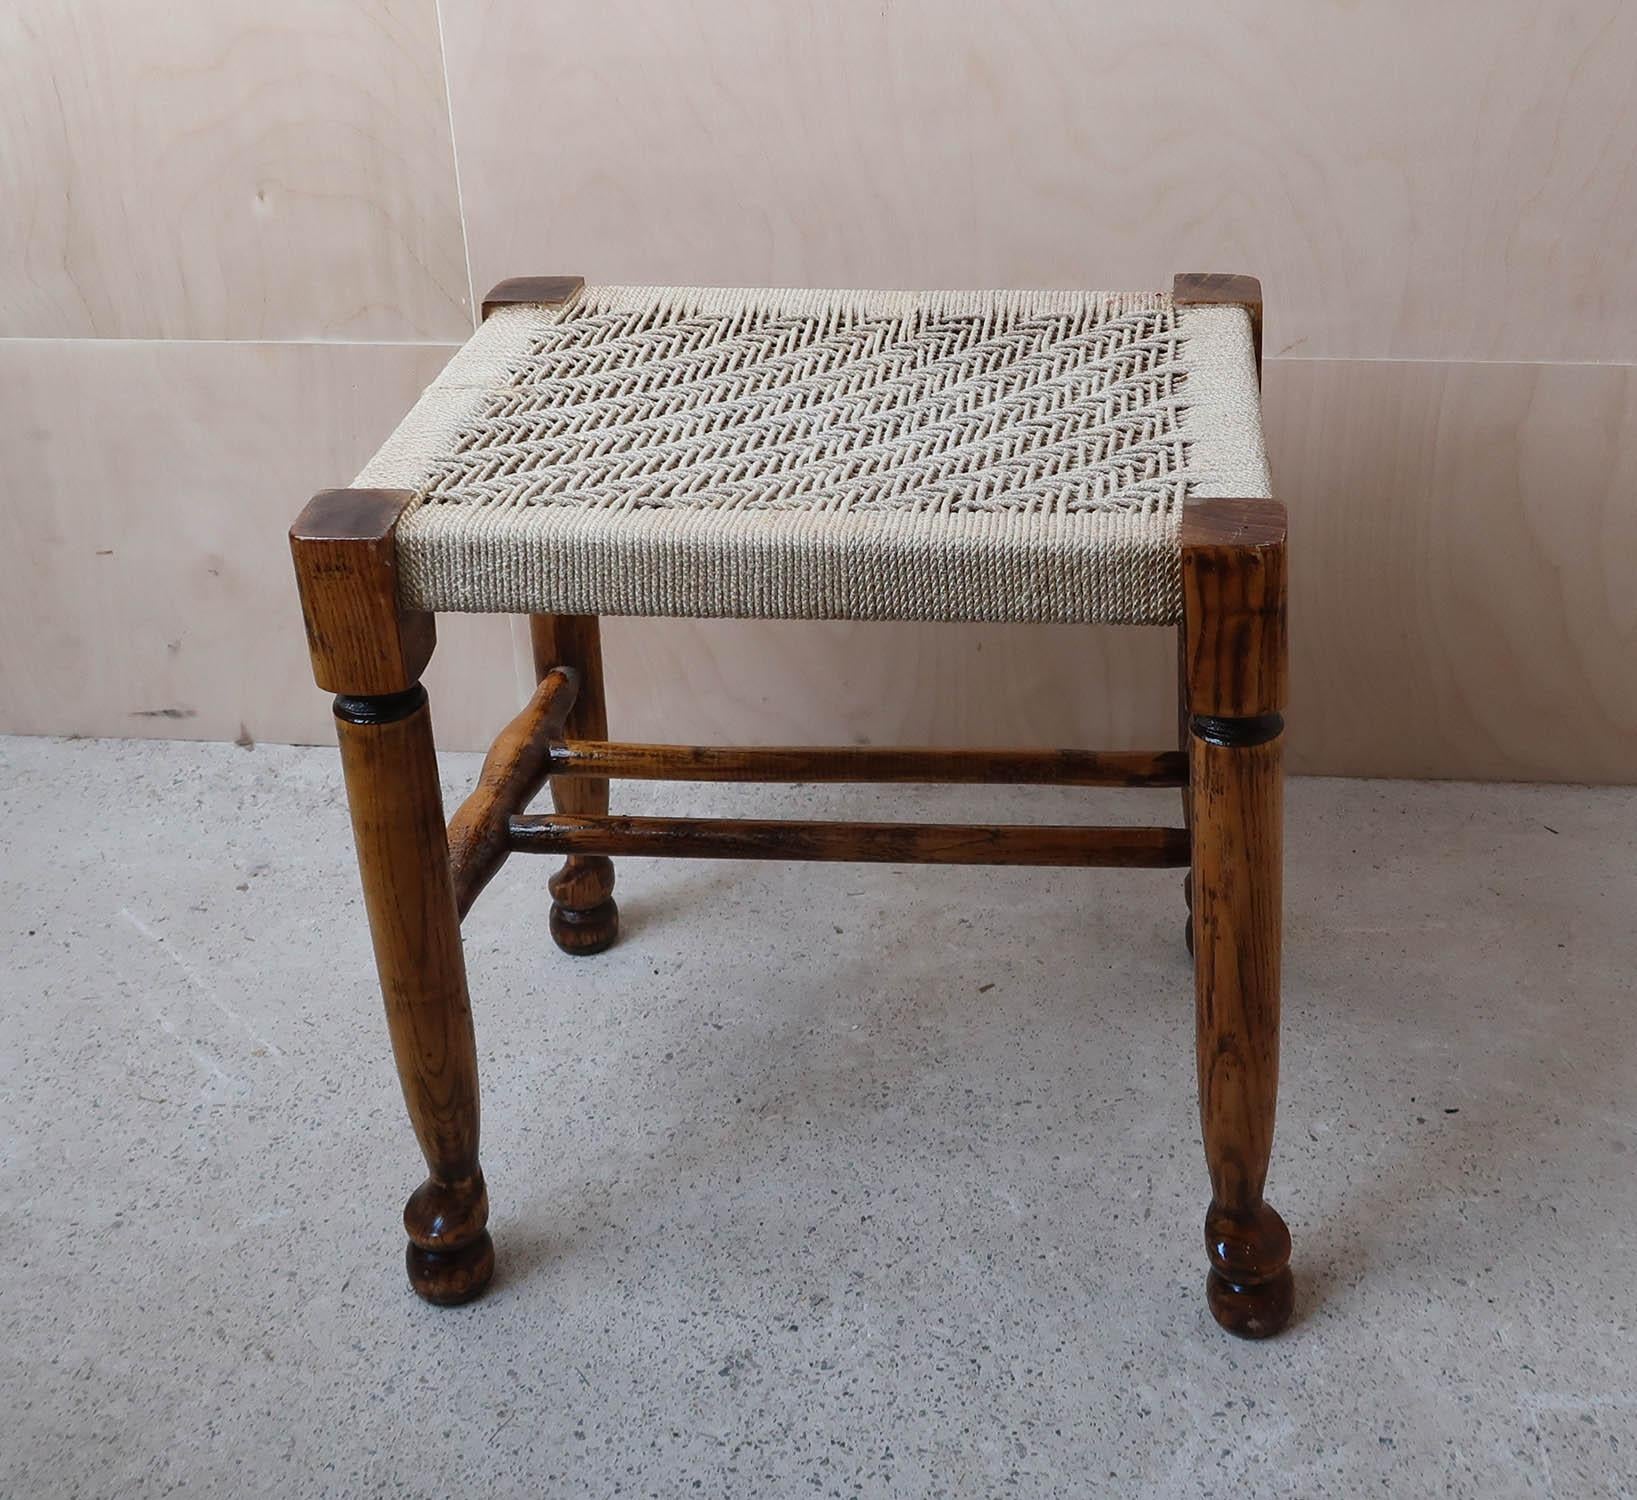 Rustic Vintage Ash and Elm Stool with Rattan or Cord Upholstery